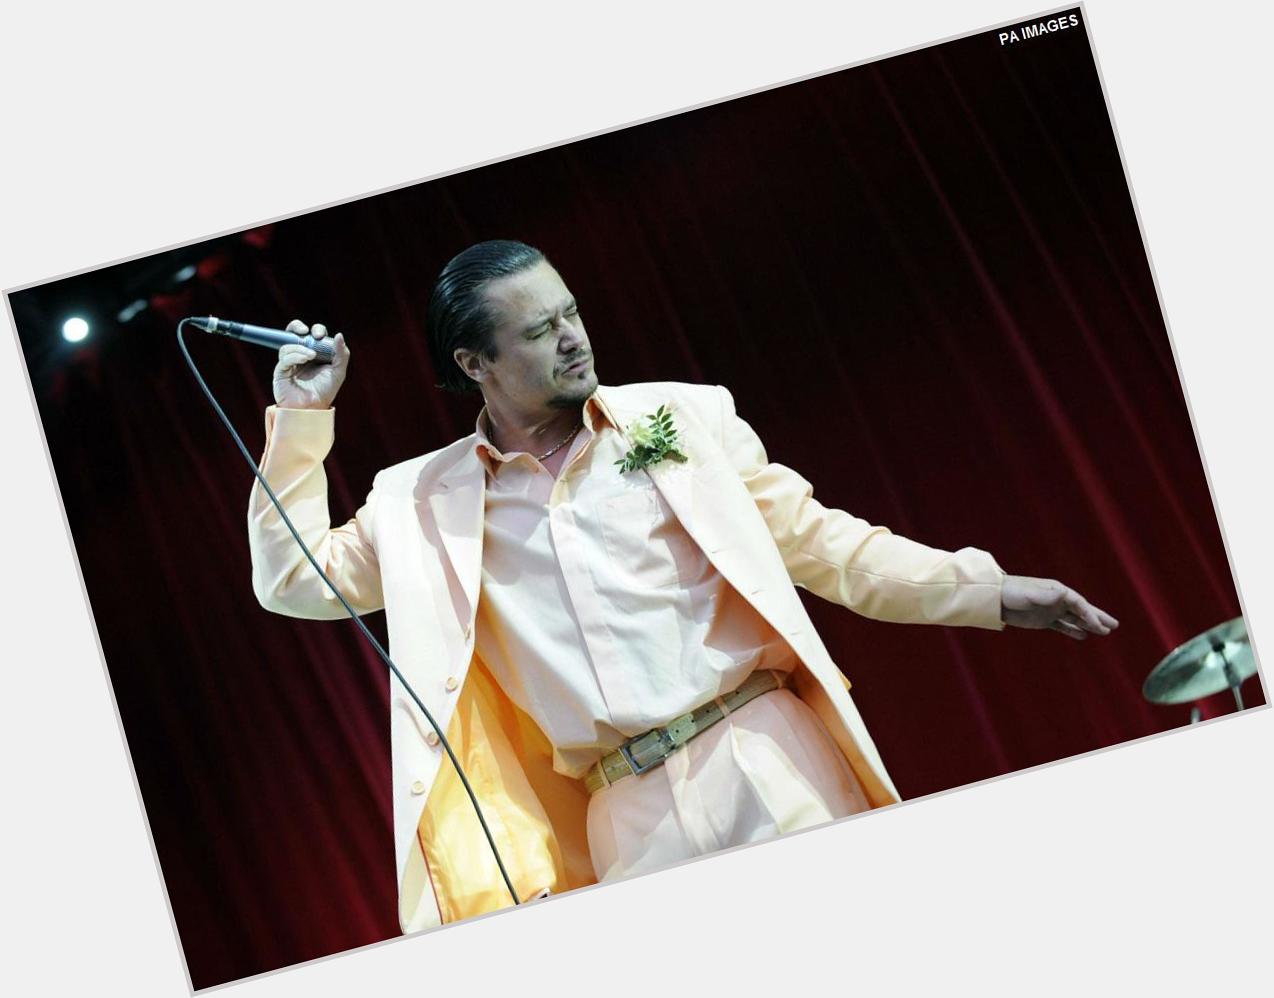 Happy Birthday Mike Patton! 47 today. 